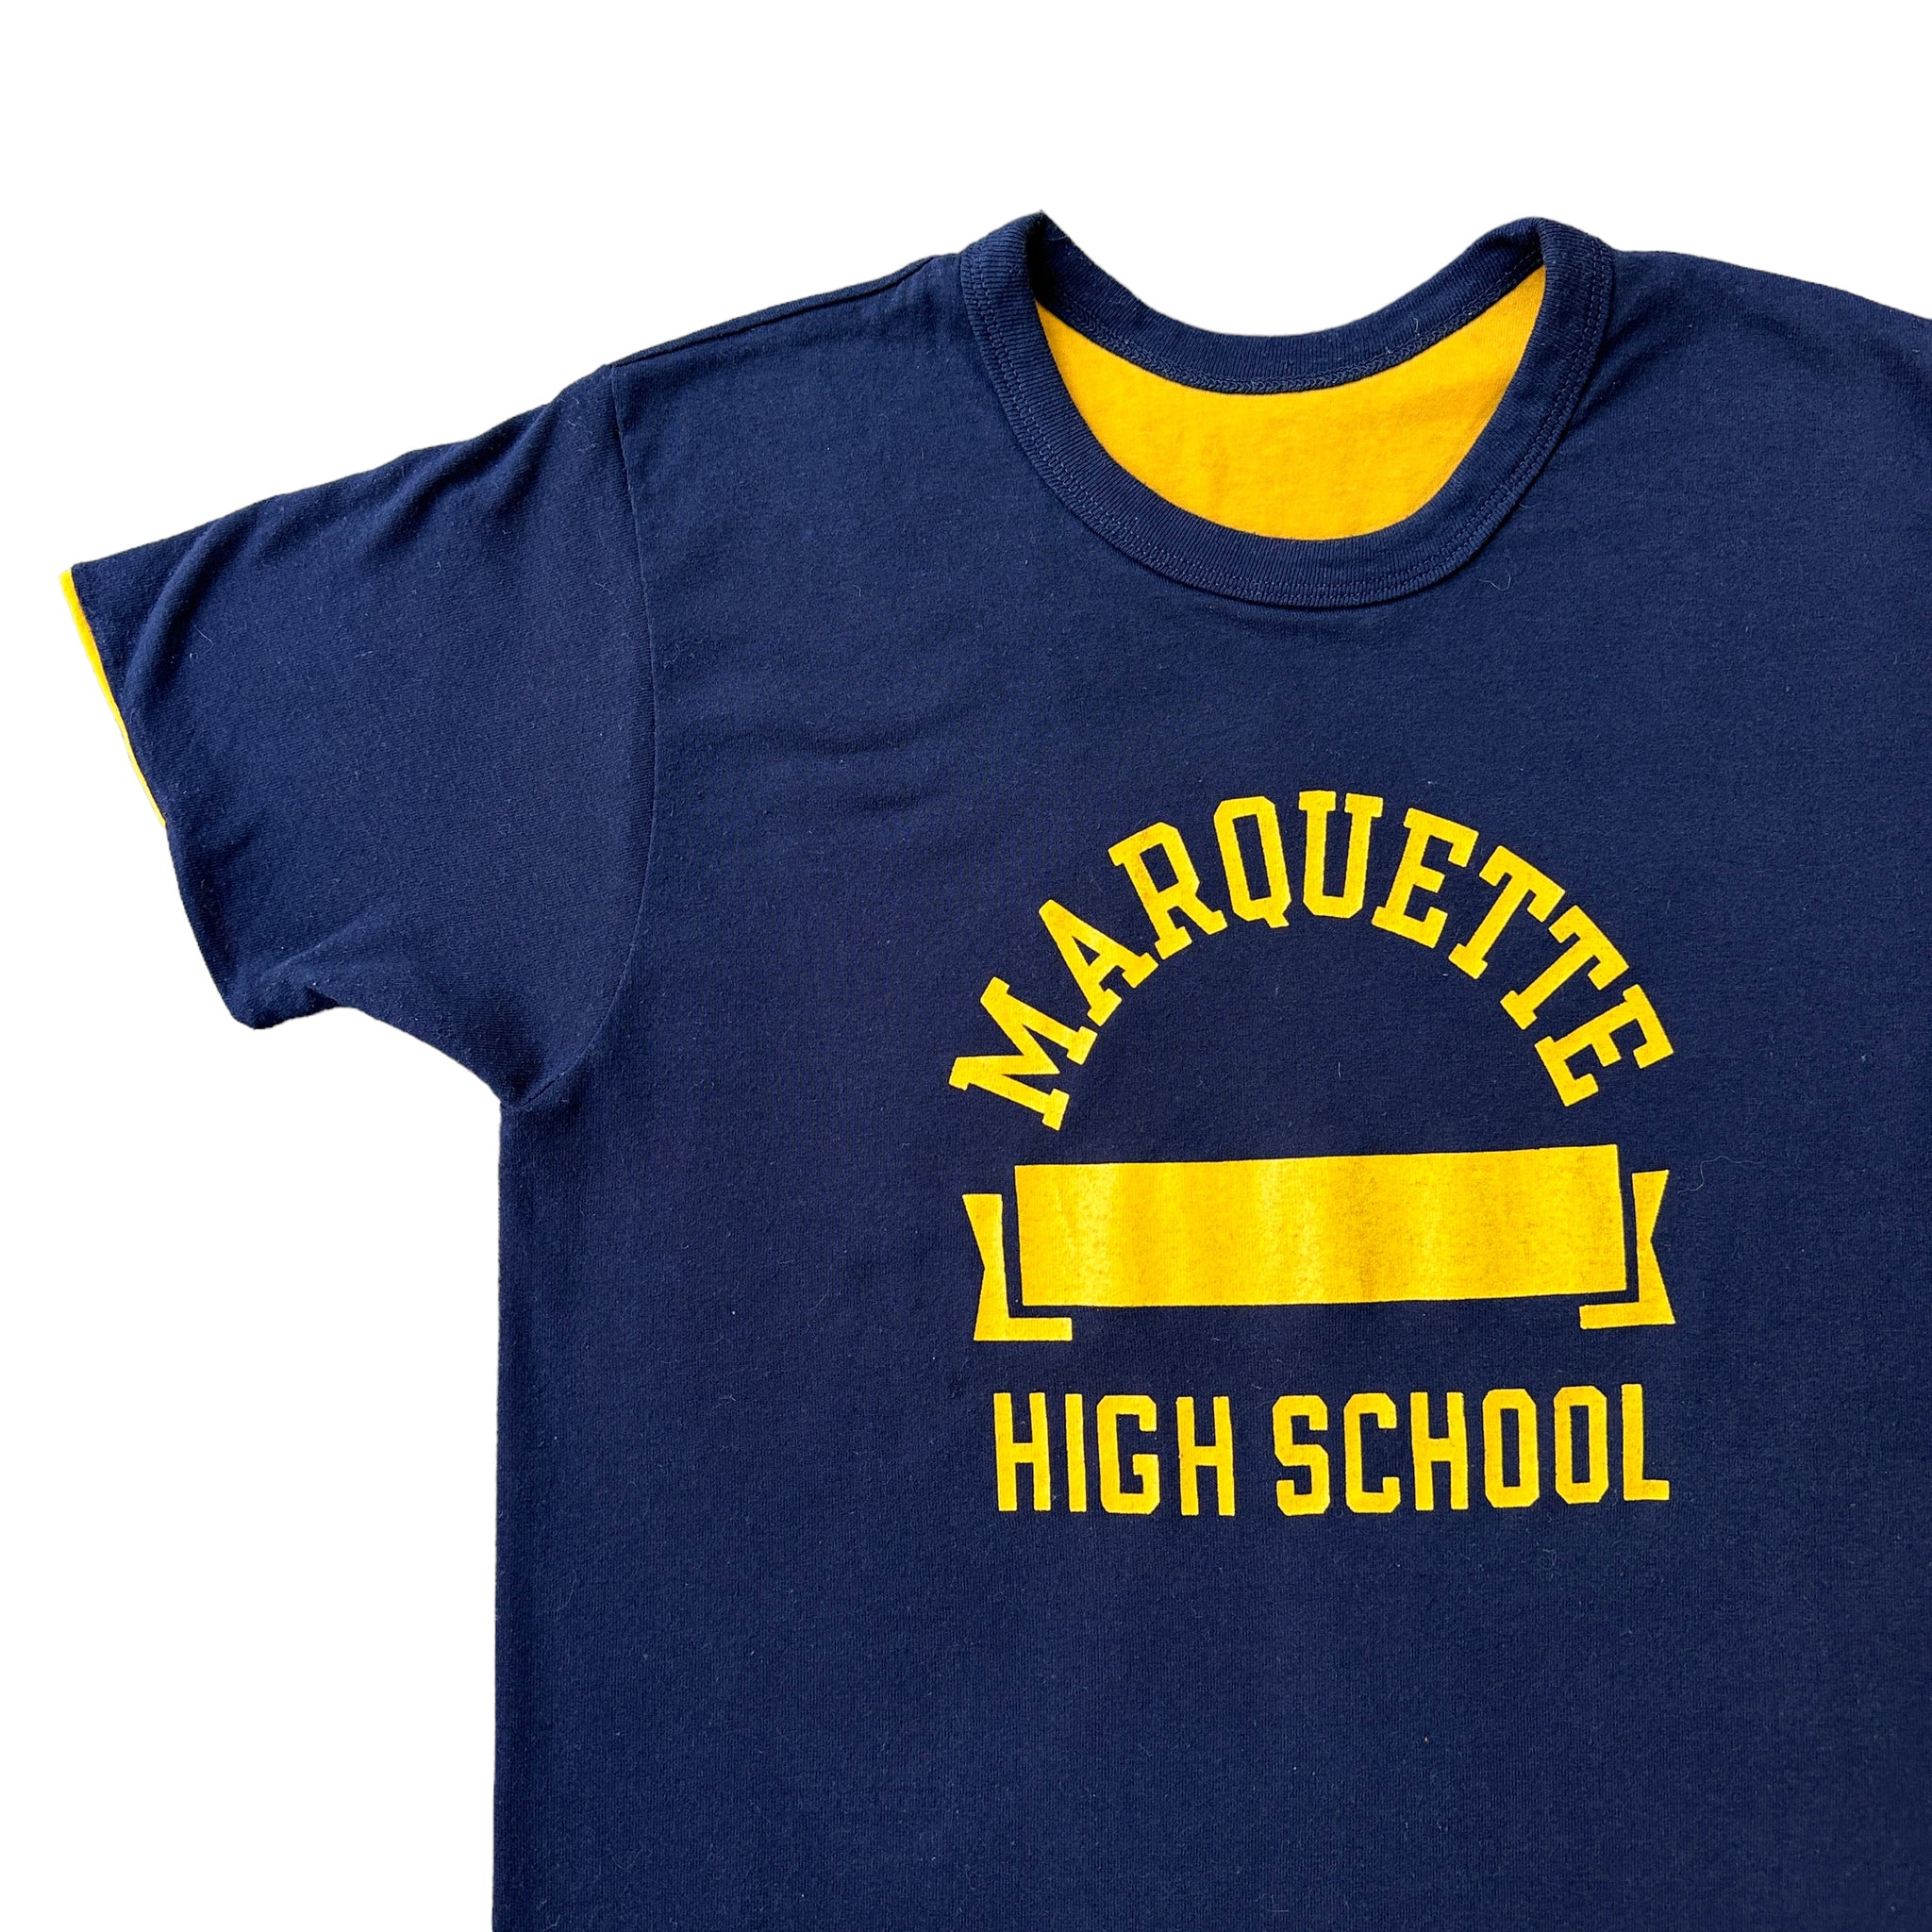 80s Champion double face two ply reversible shirt marquette
M/L